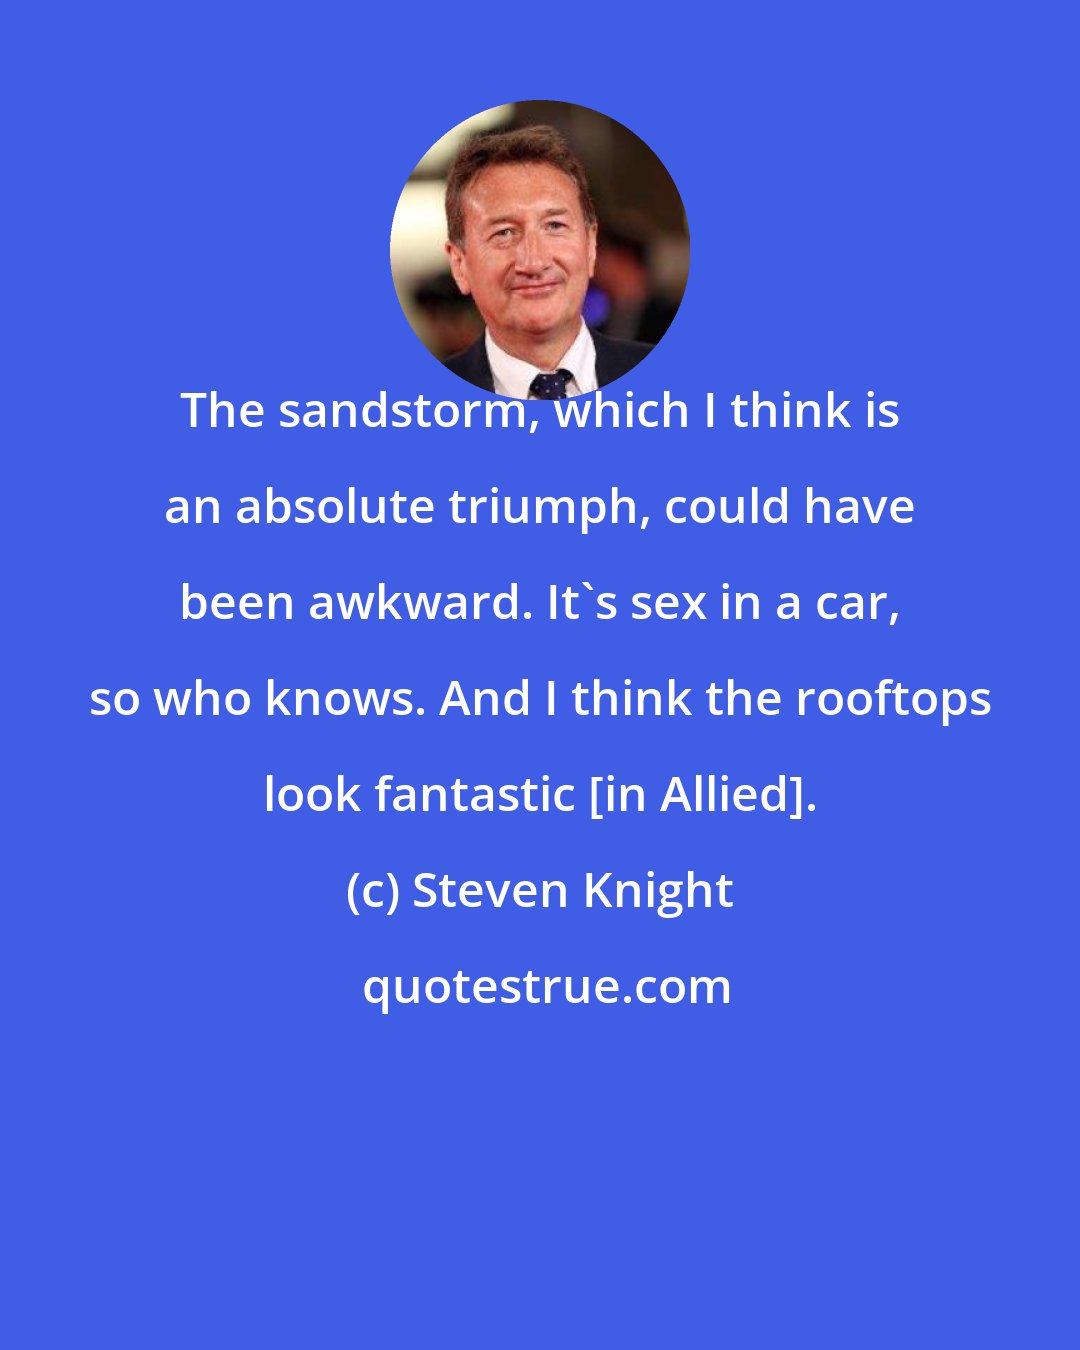 Steven Knight: The sandstorm, which I think is an absolute triumph, could have been awkward. It's sex in a car, so who knows. And I think the rooftops look fantastic [in Allied].